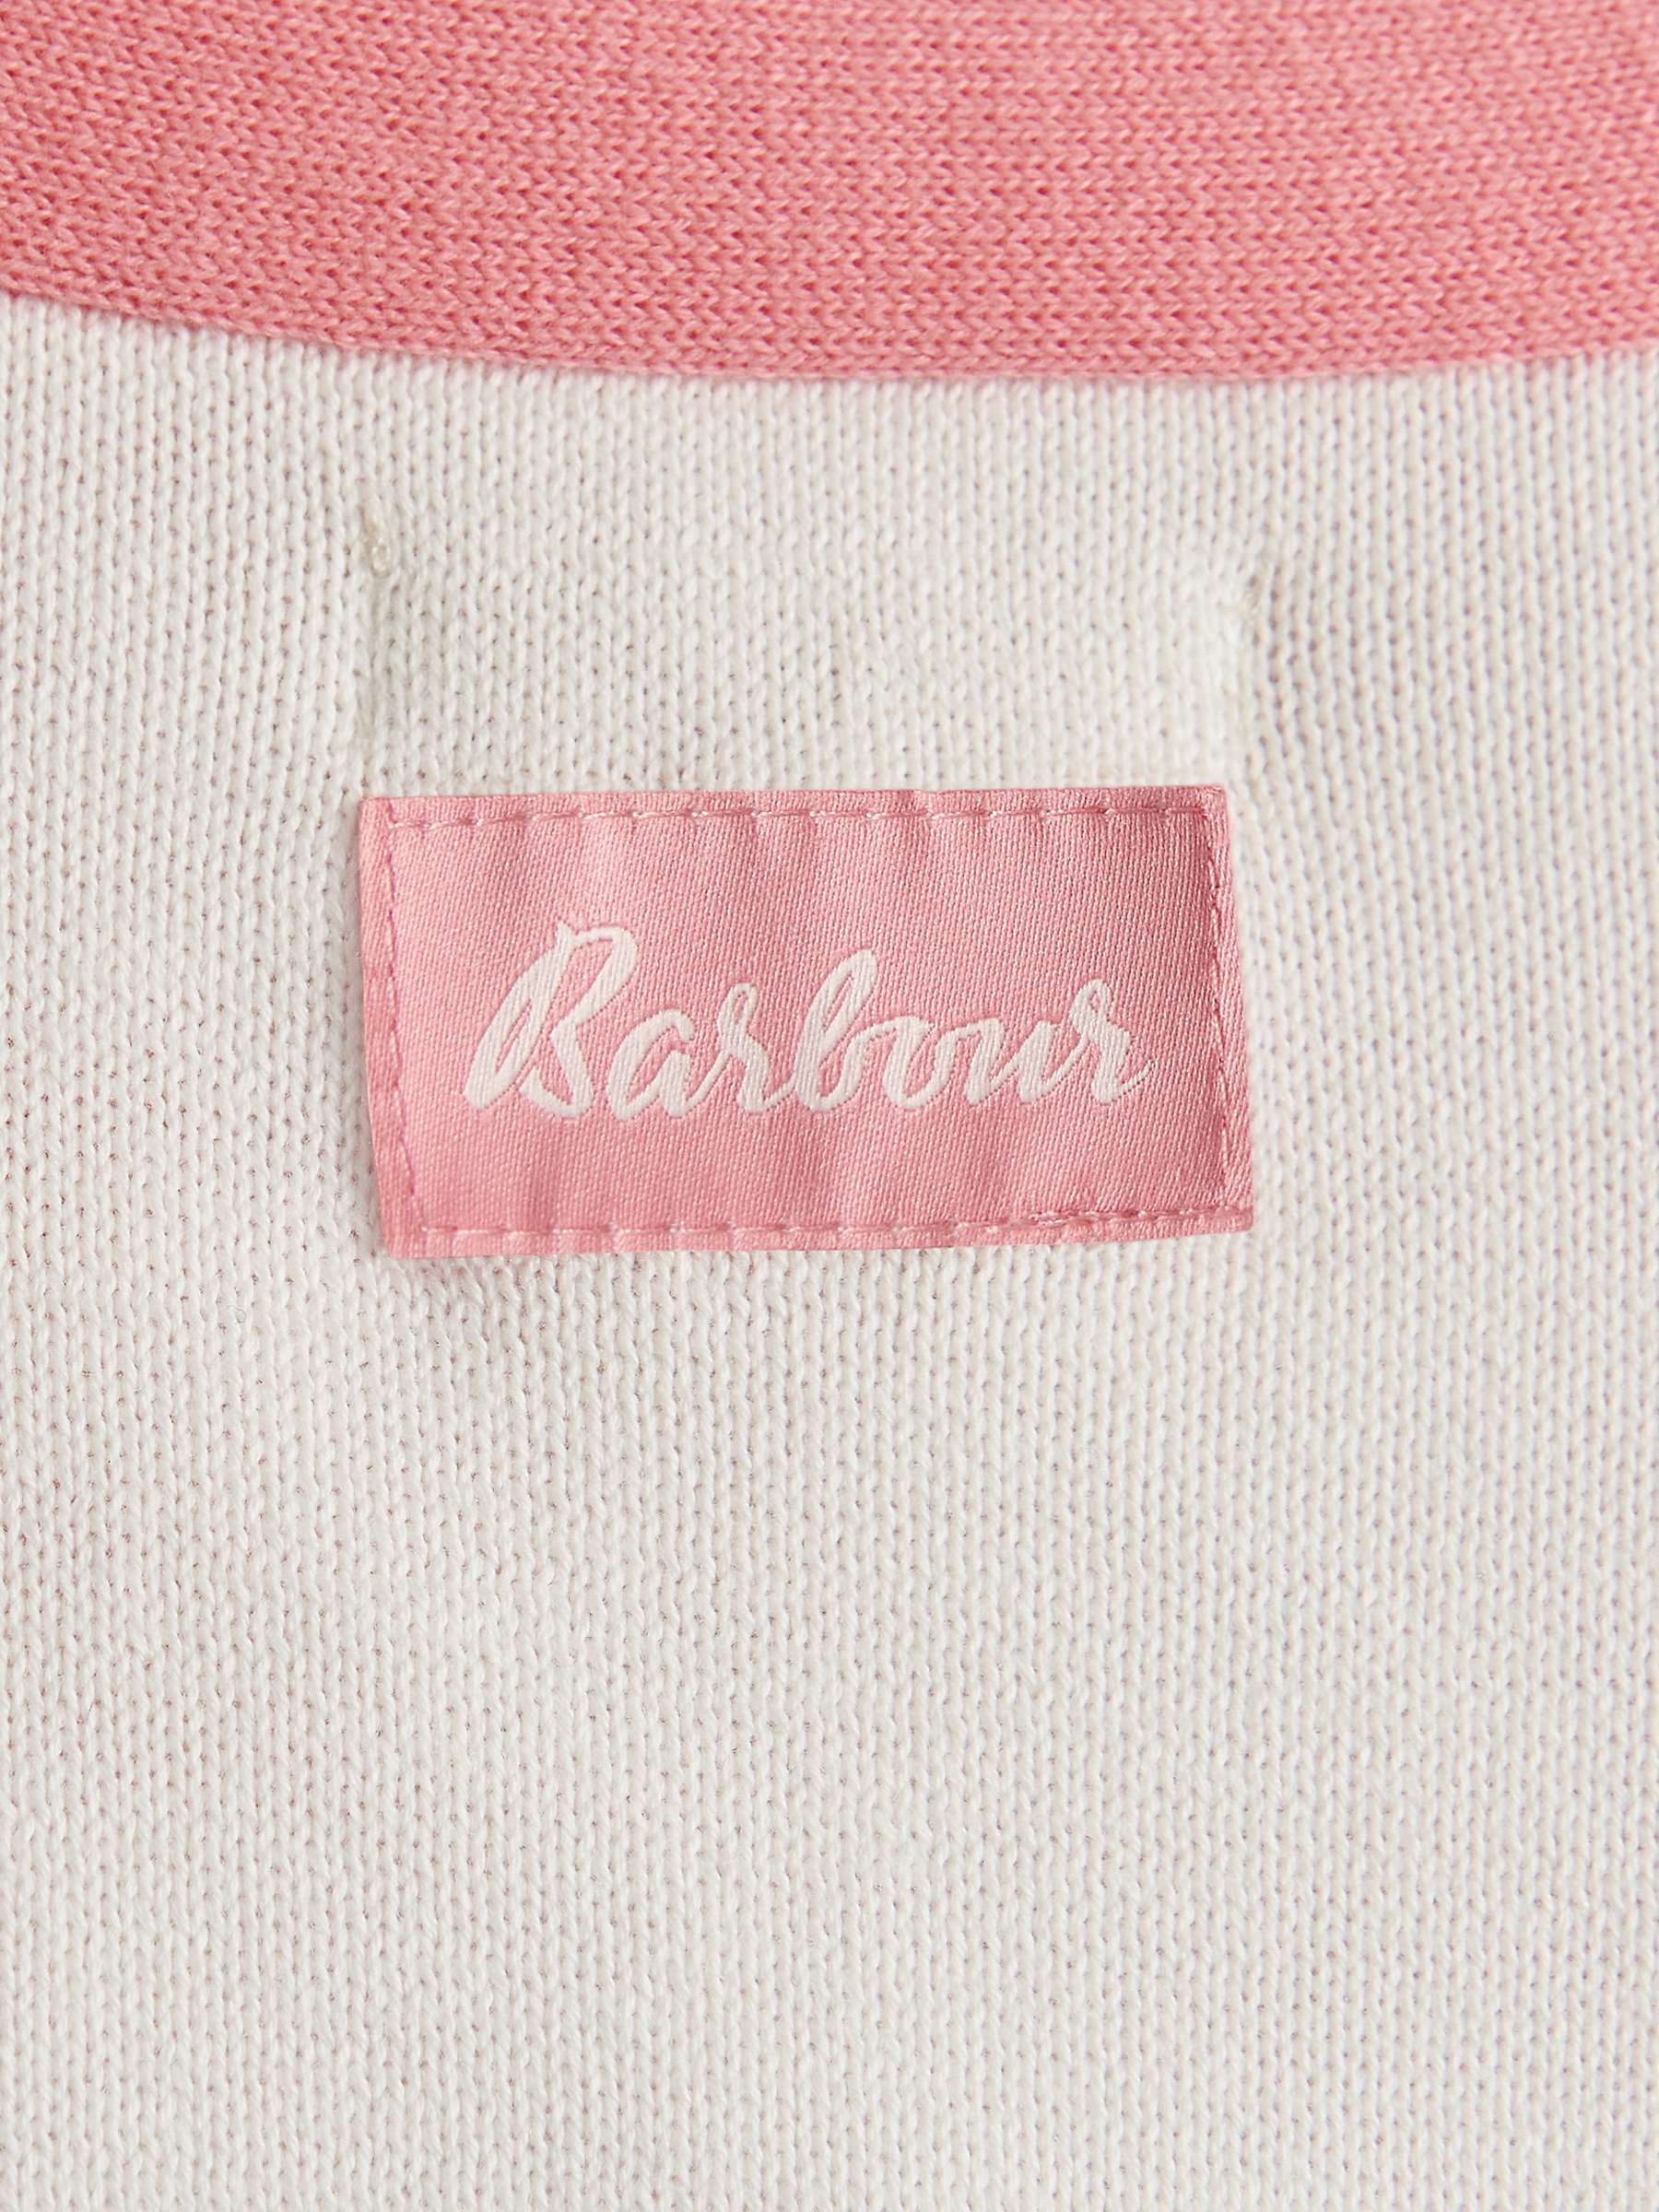 Buy Barbour Kids' Knitted Cardigan, Cream/Pink Online at johnlewis.com